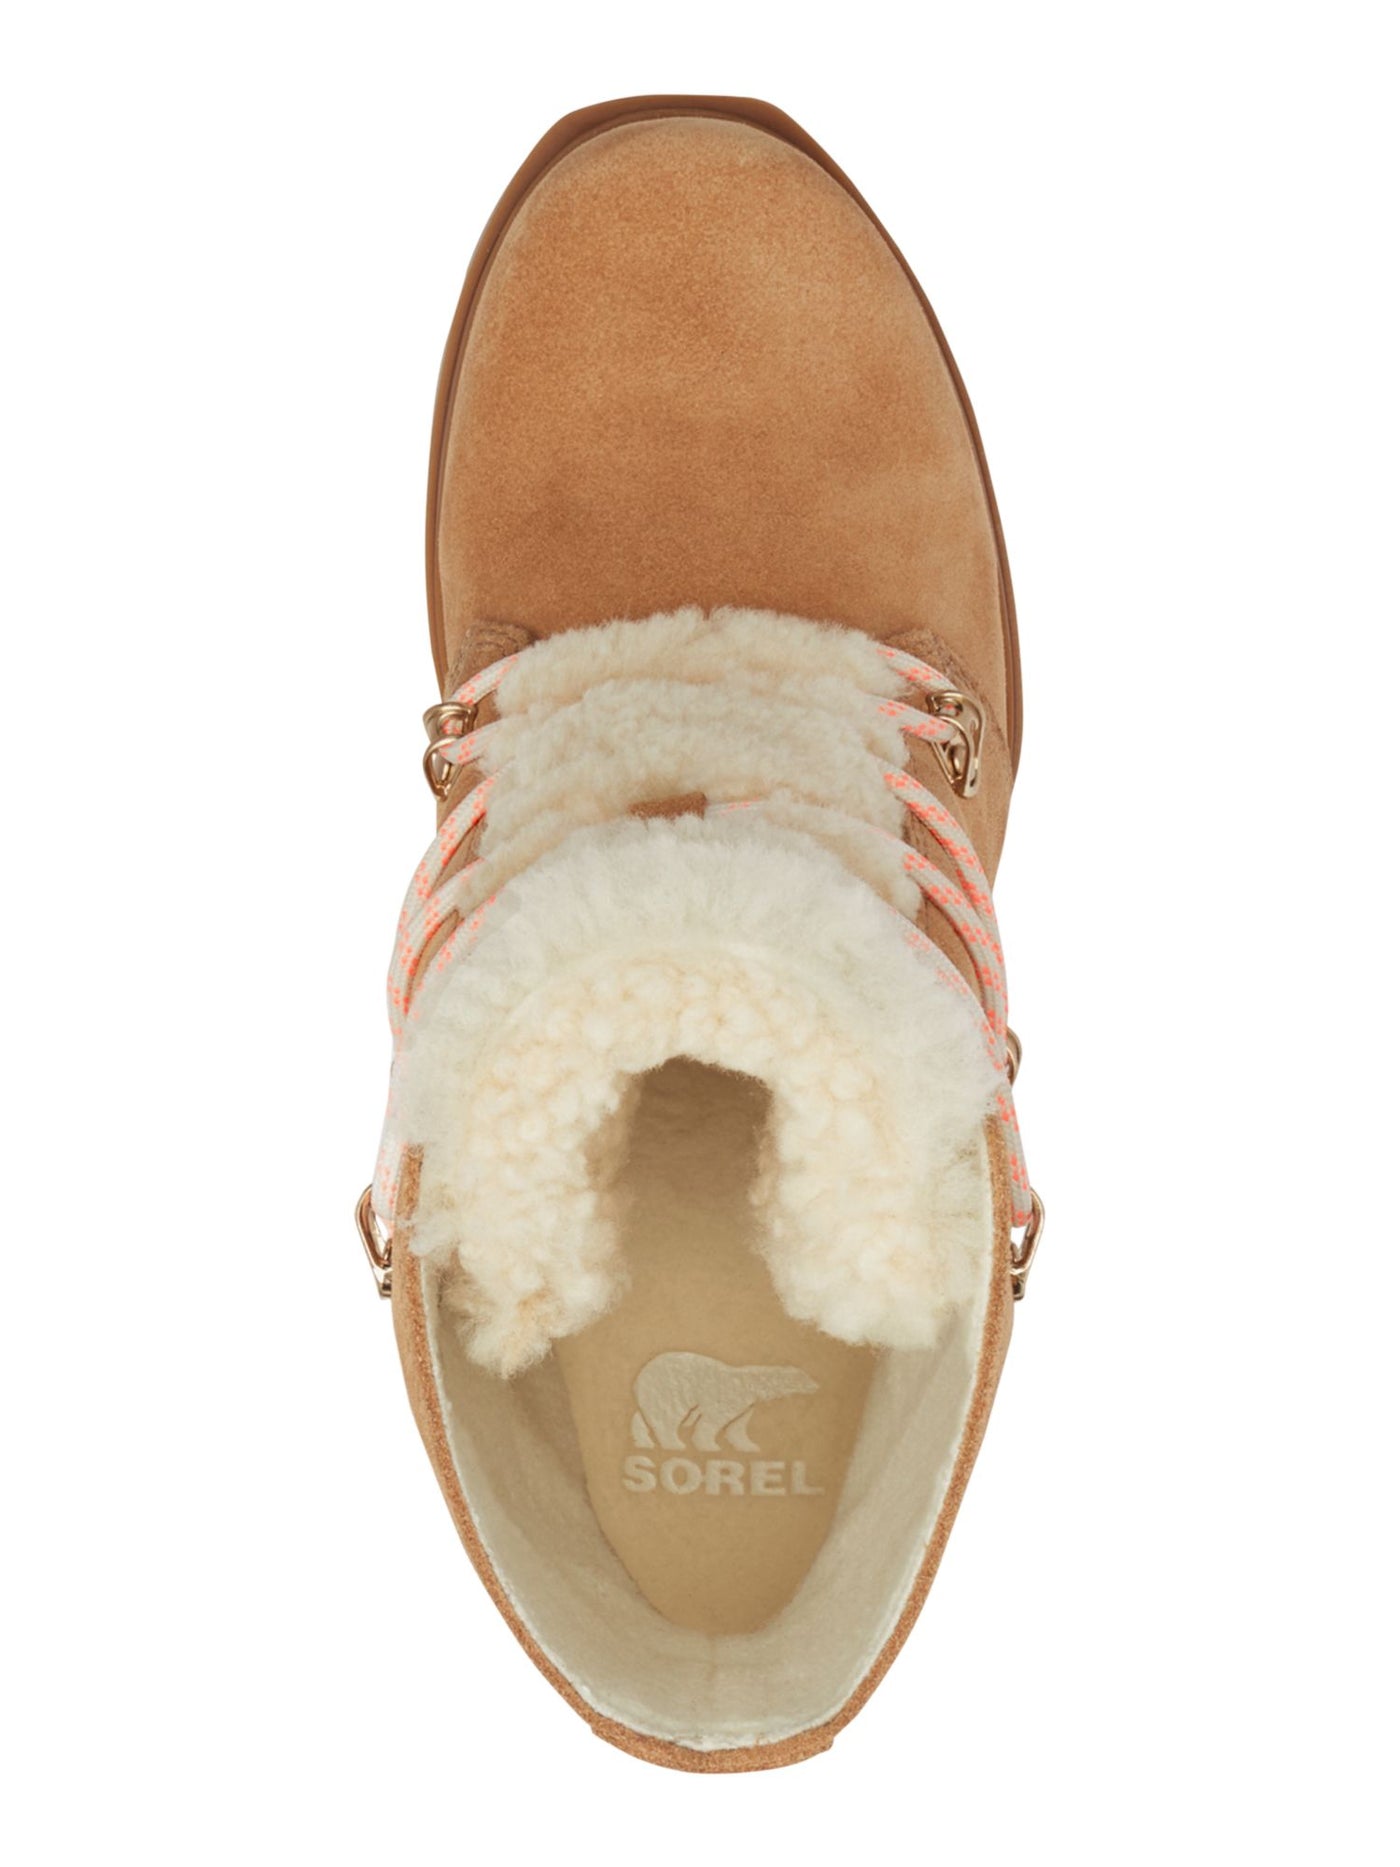 SOREL Womens Beige Shearling Tongue Padded Round Toe Lace-Up Leather Booties 10